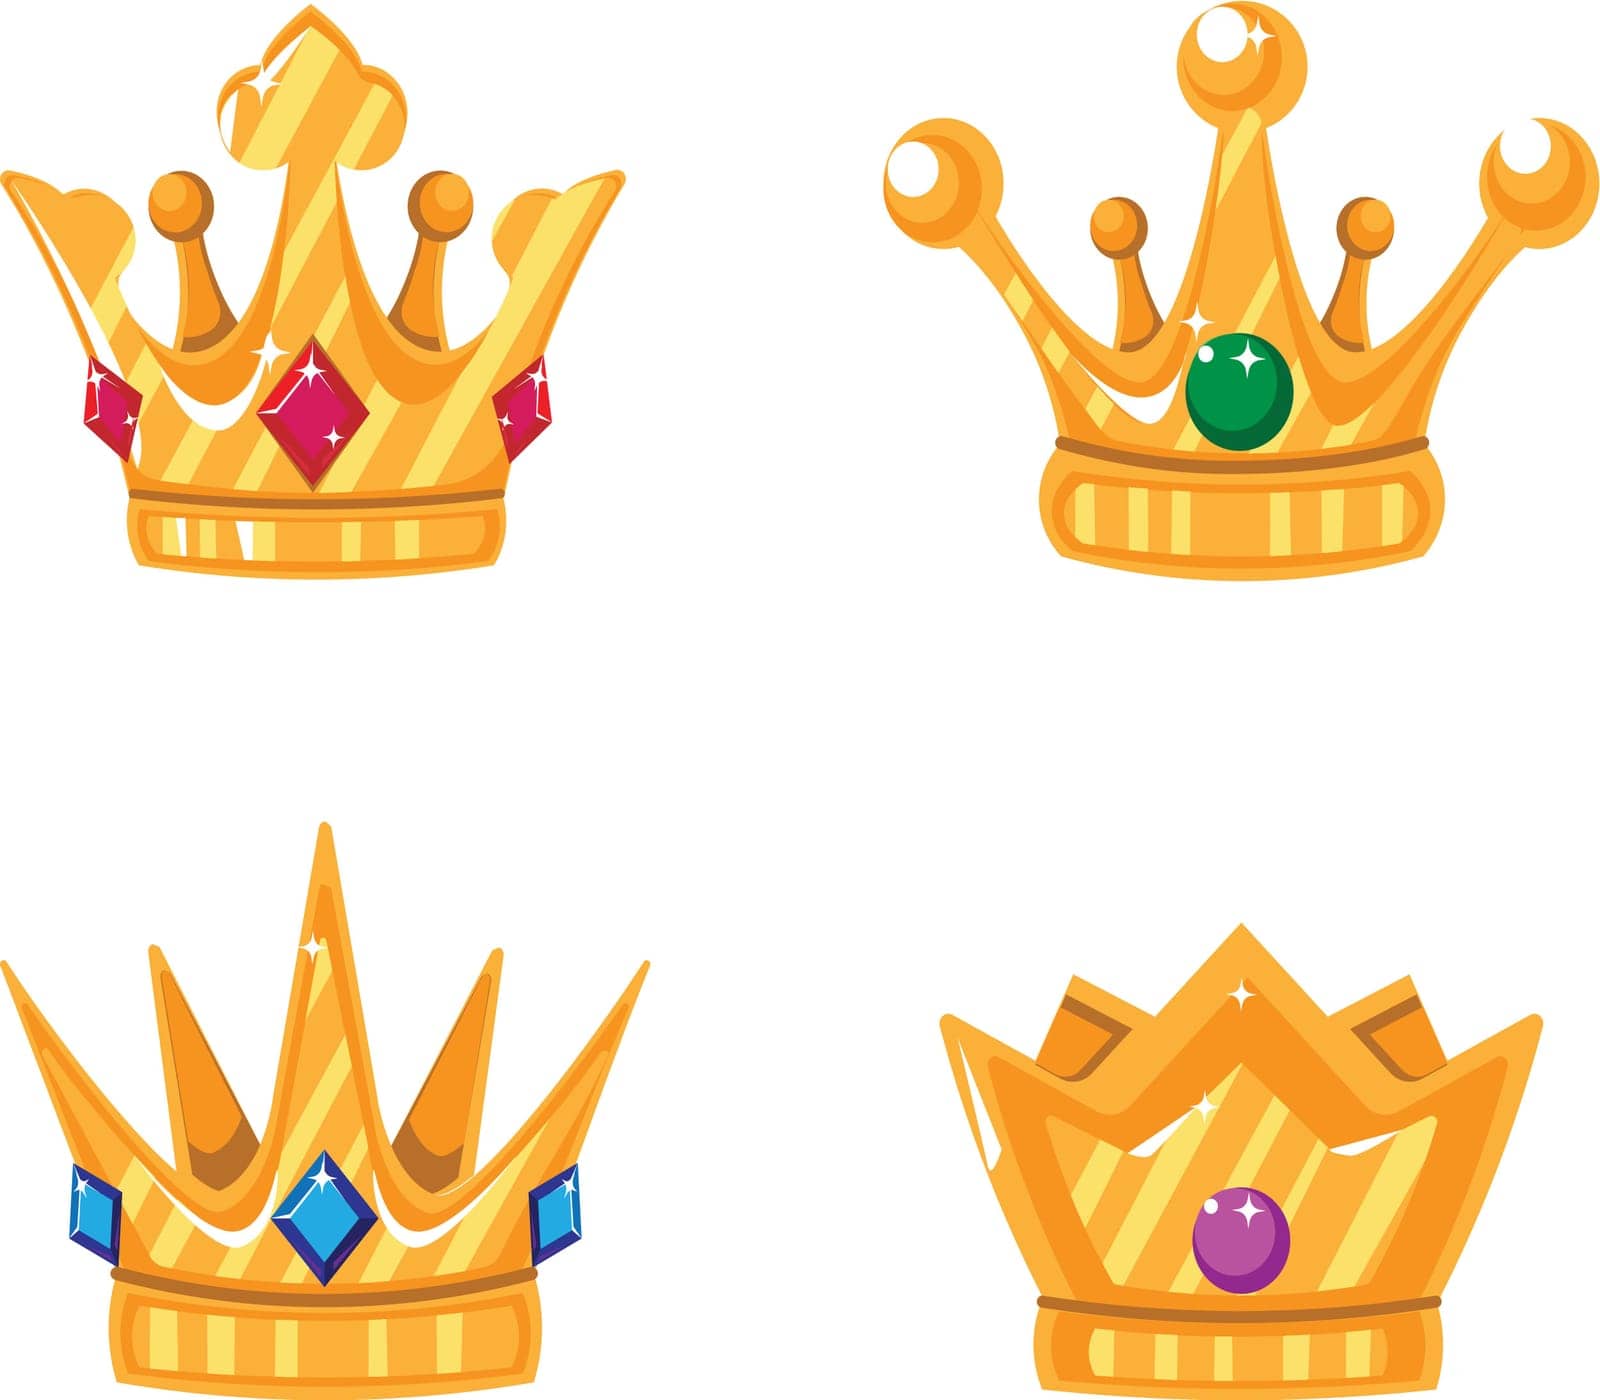 Set of gold crown icons with gems. Collection of crown awards for winners, champions, leadership. Vector isolated elements for logo, label, game, hotel, an app design. Royal king, queen, princess crown.Isolated.